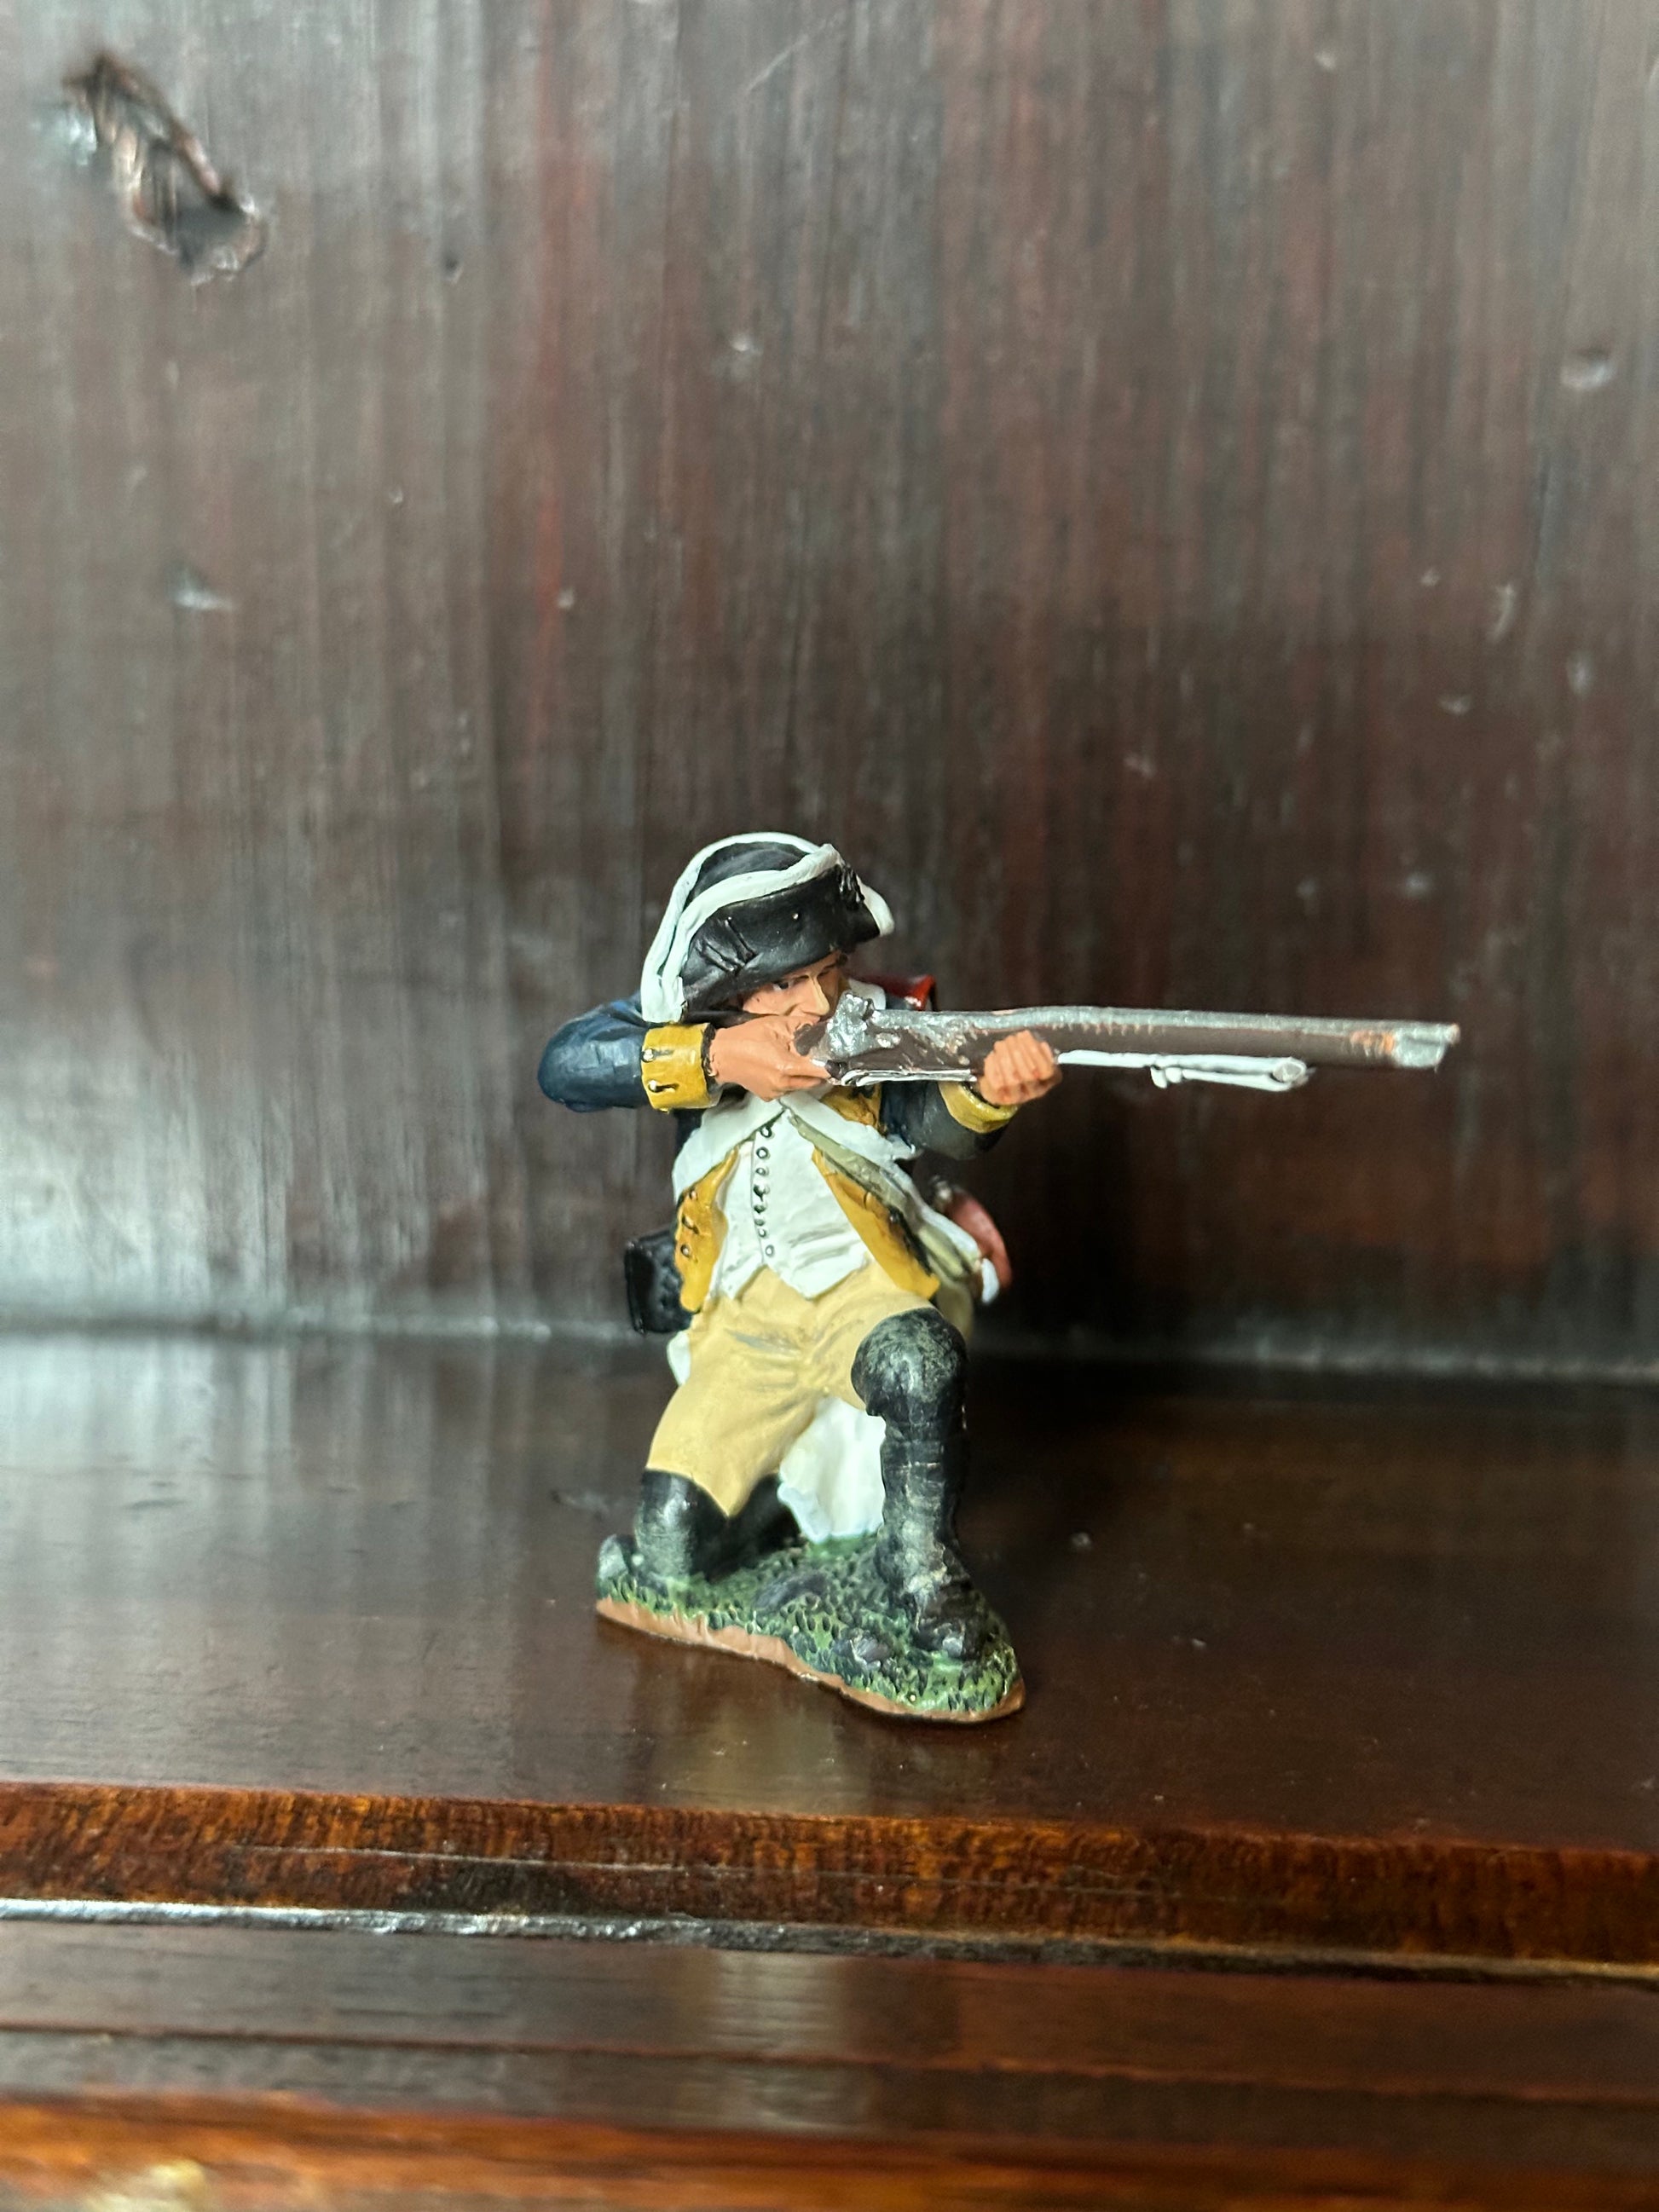 Collectible toy soldier miniature army men Kneeling Firing Rifle. On a book shelf.